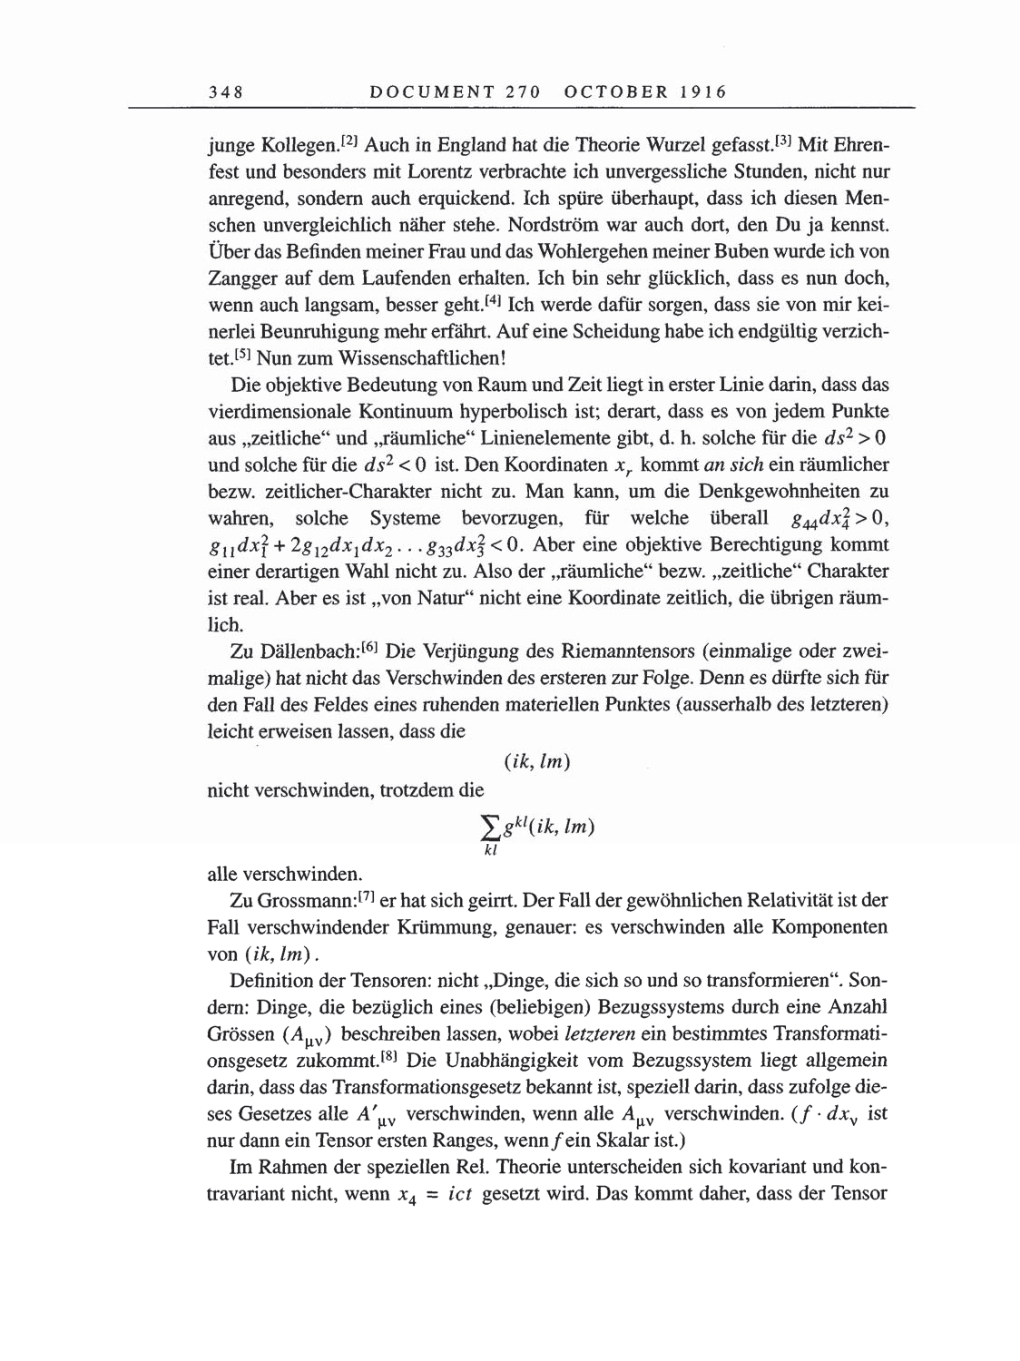 Volume 8, Part A: The Berlin Years: Correspondence 1914-1917 page 348